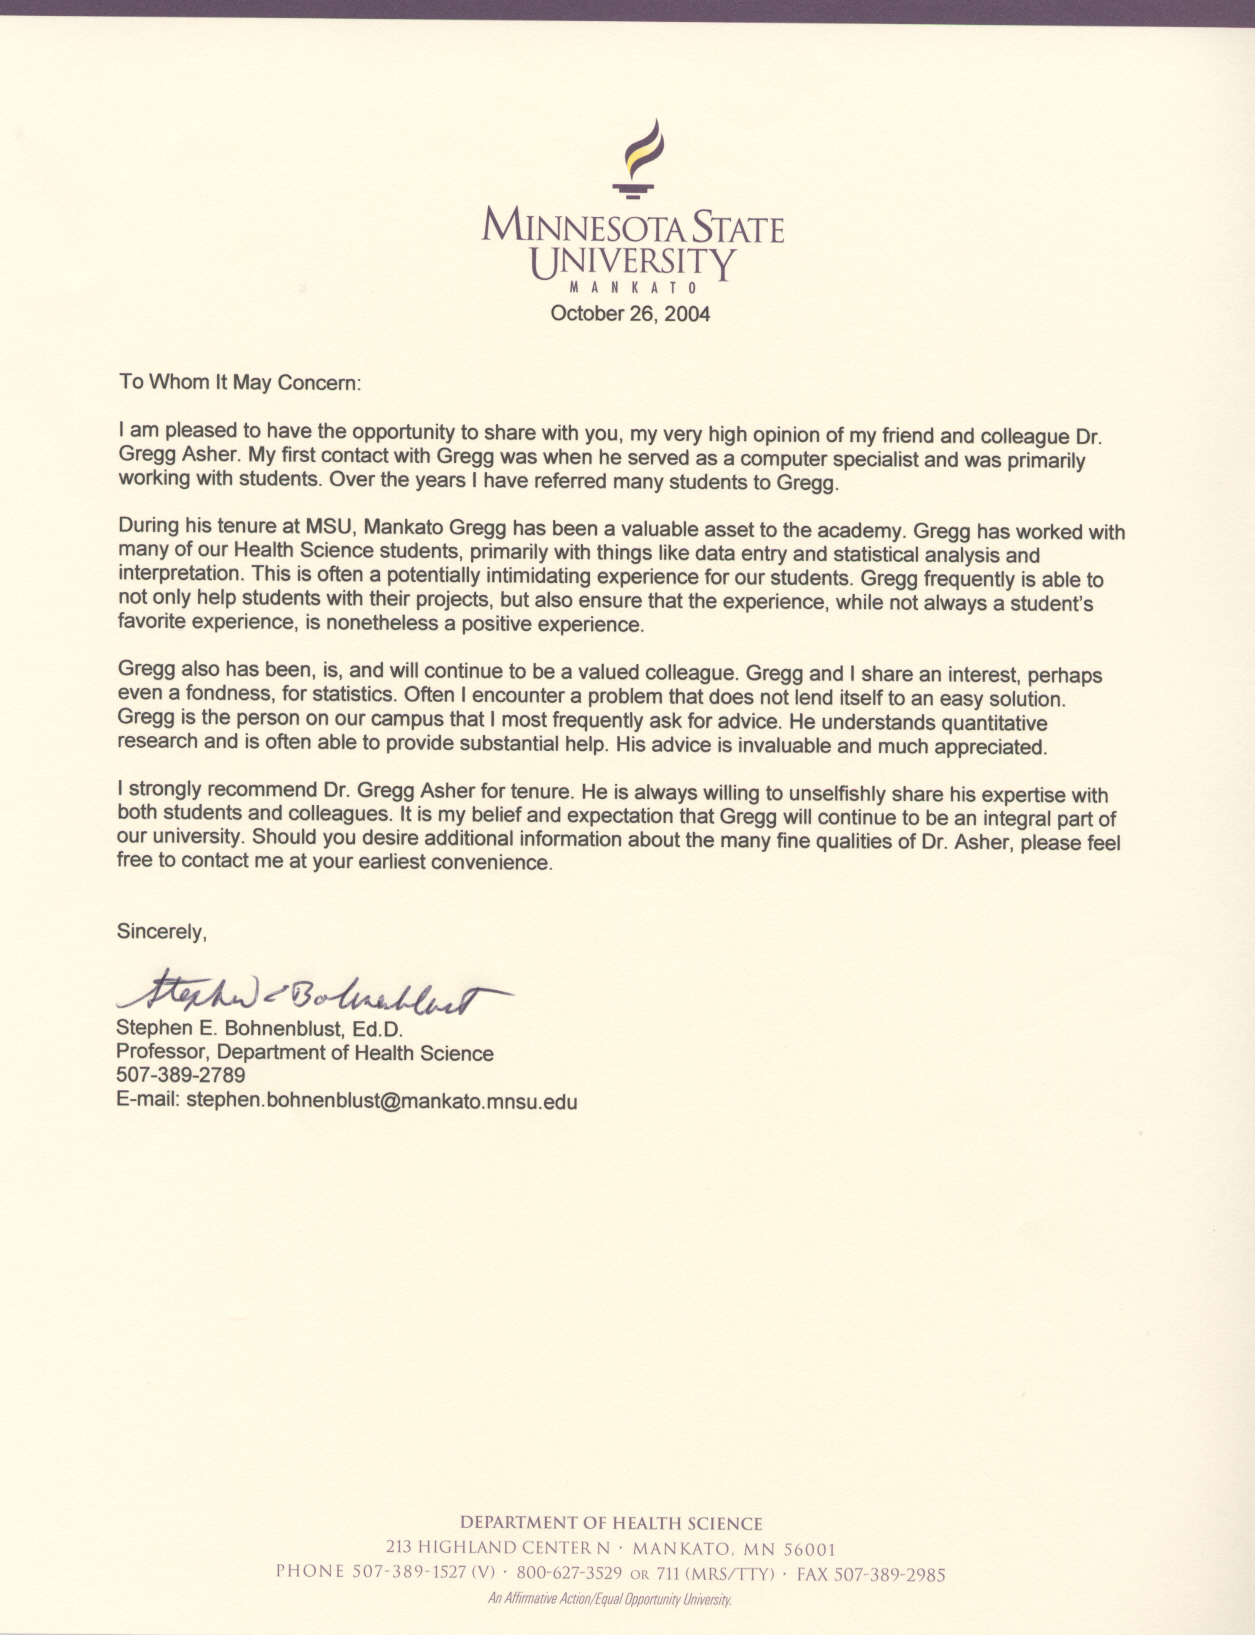 Gregg W. Asher's Tenure Letters CIS Department and University Community